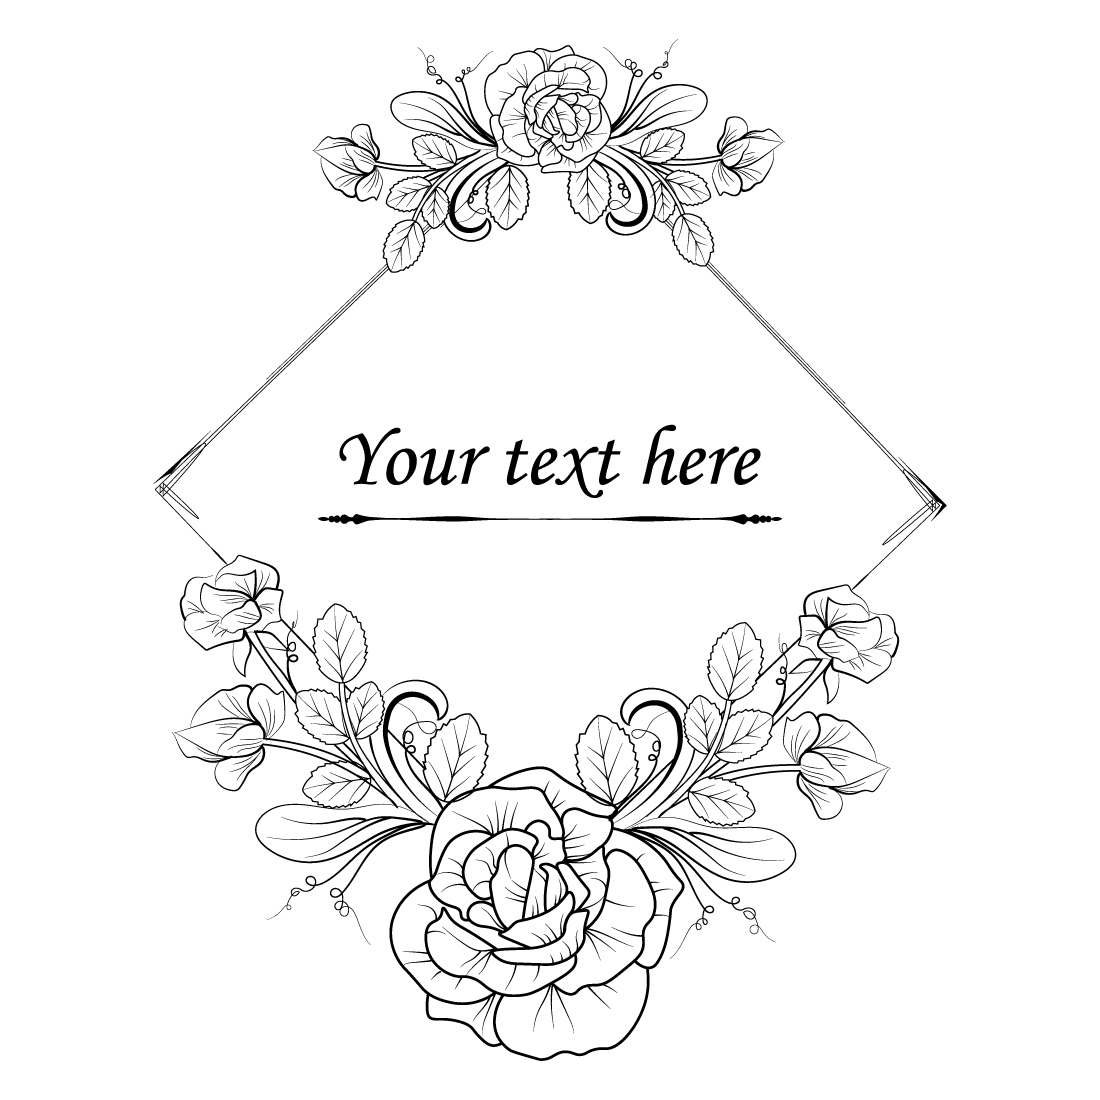 rose vector, rose vector black and white, vector rose flower clipart black and white, preview image.